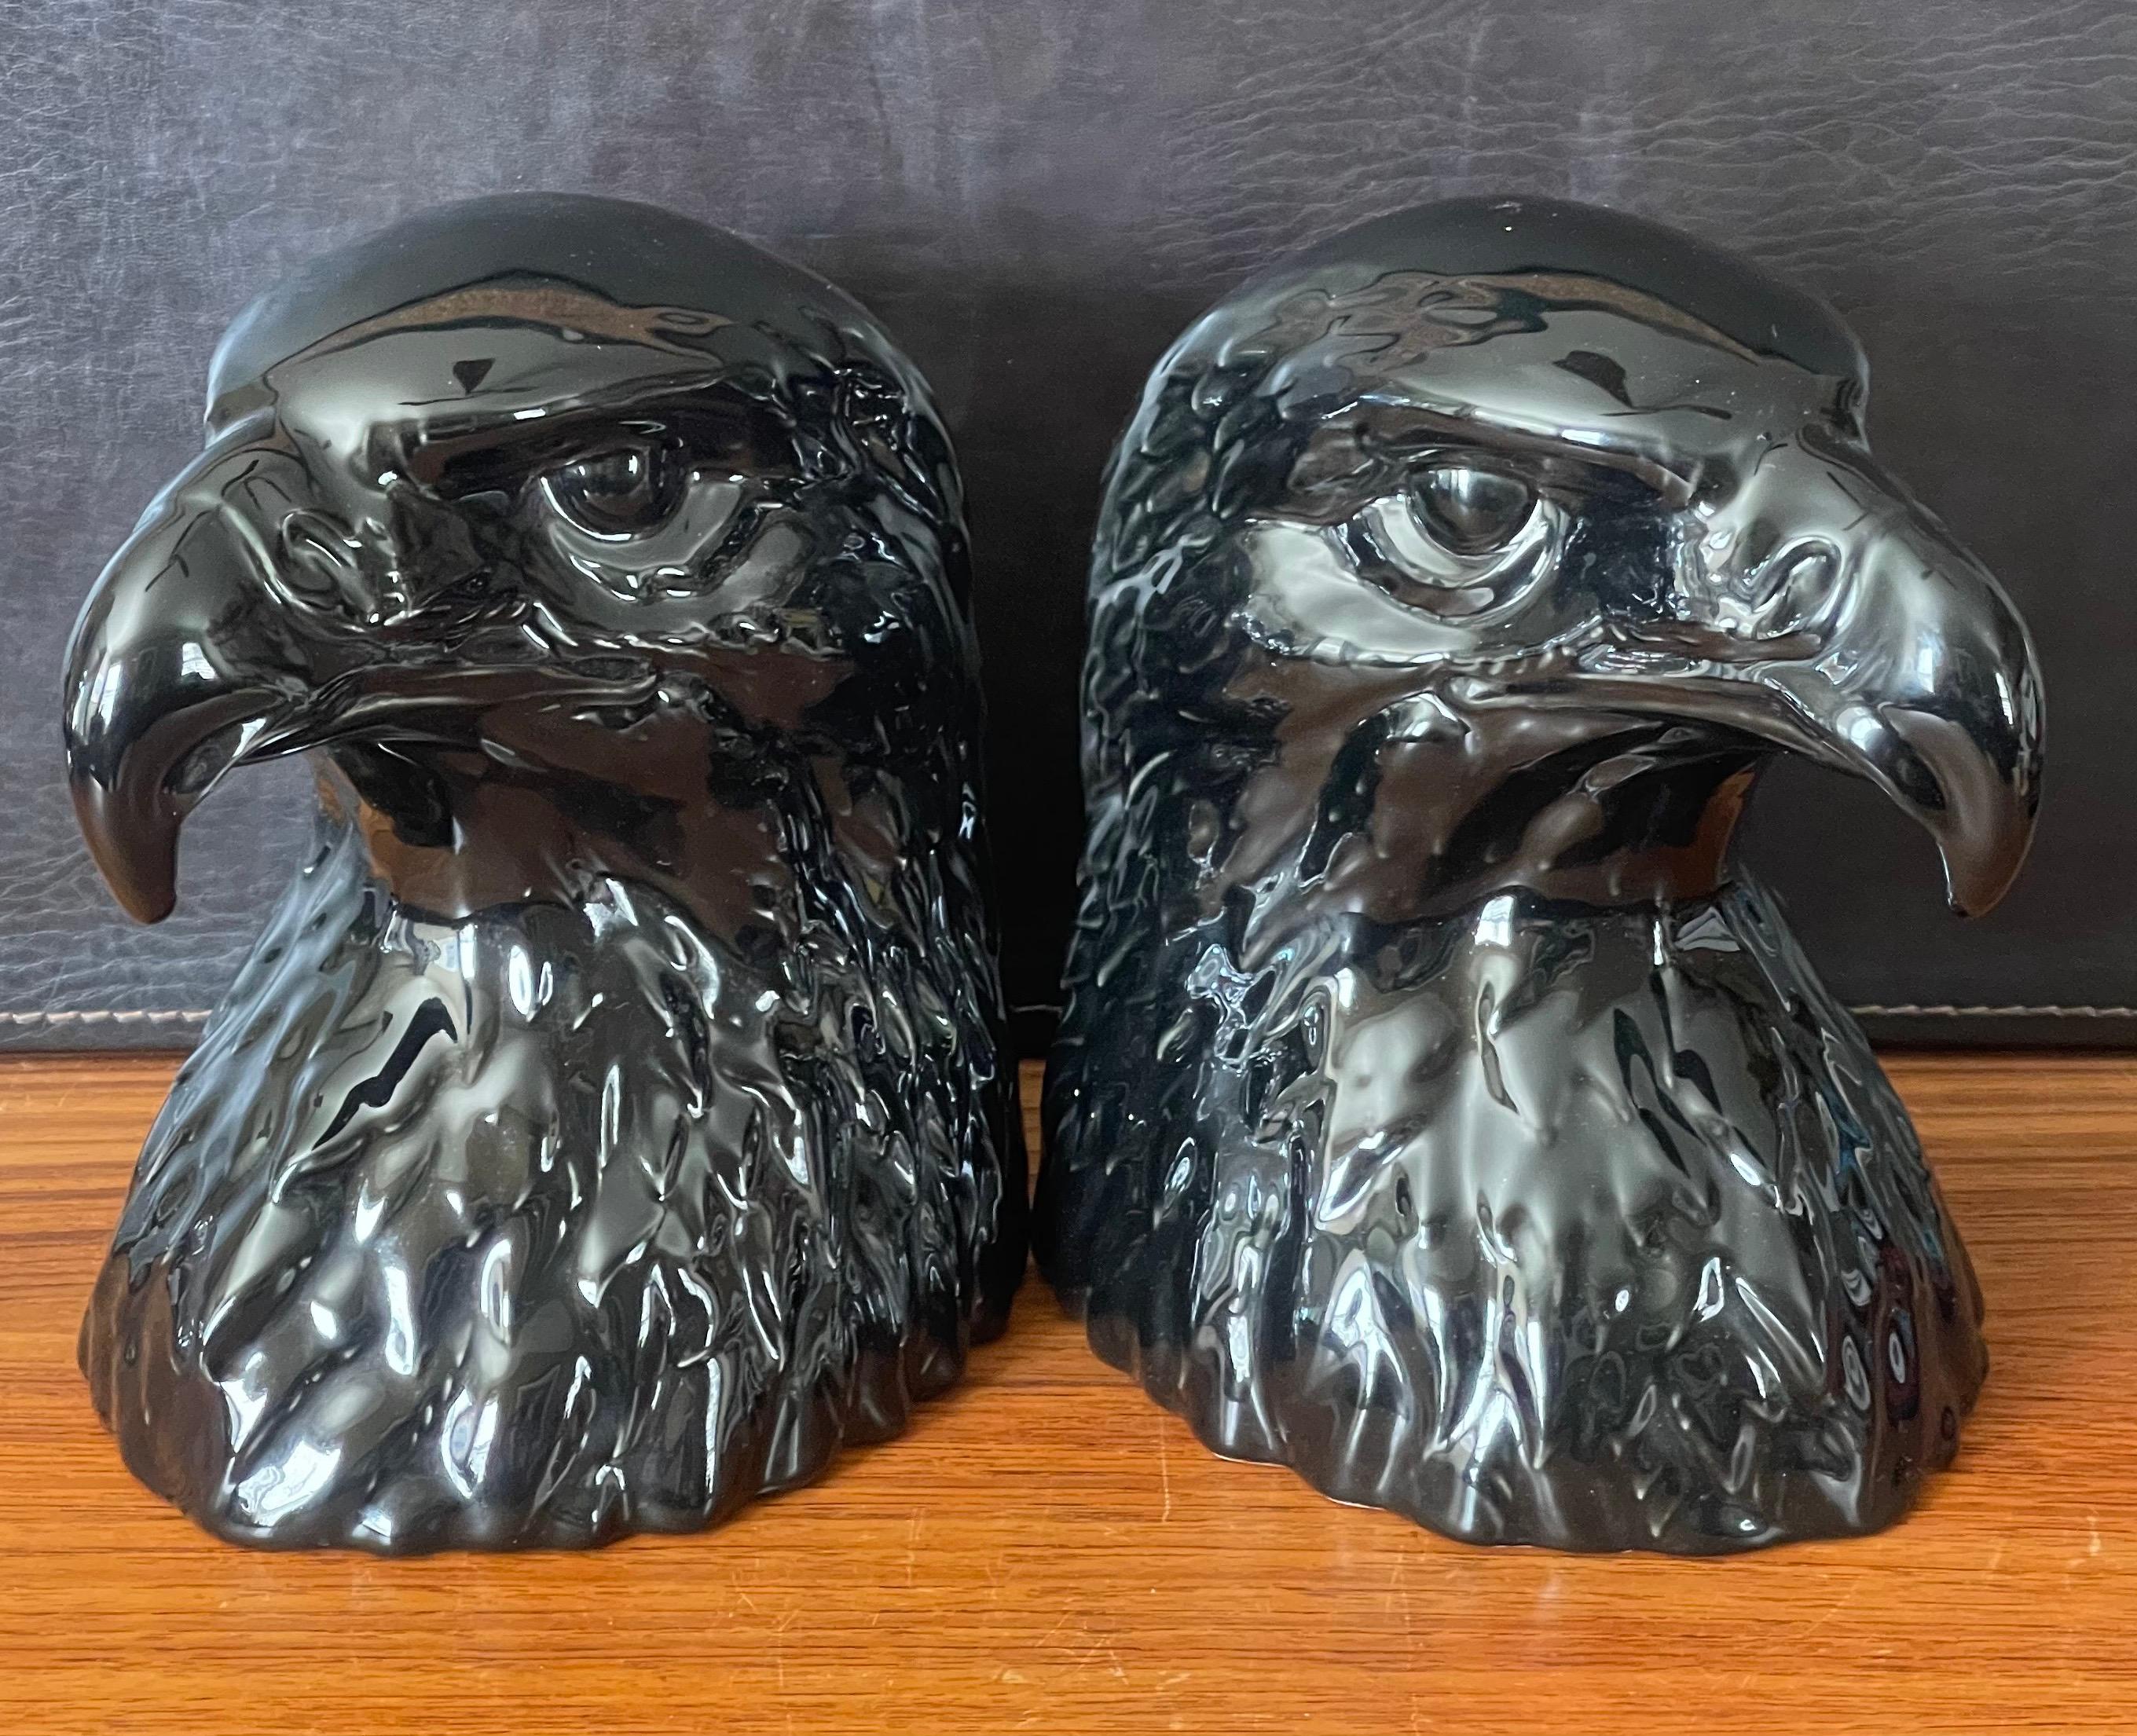 Spanish Pair of Glossy Black Porcelain Eagle Head Bookends by Hispania Daiso / LLadro For Sale